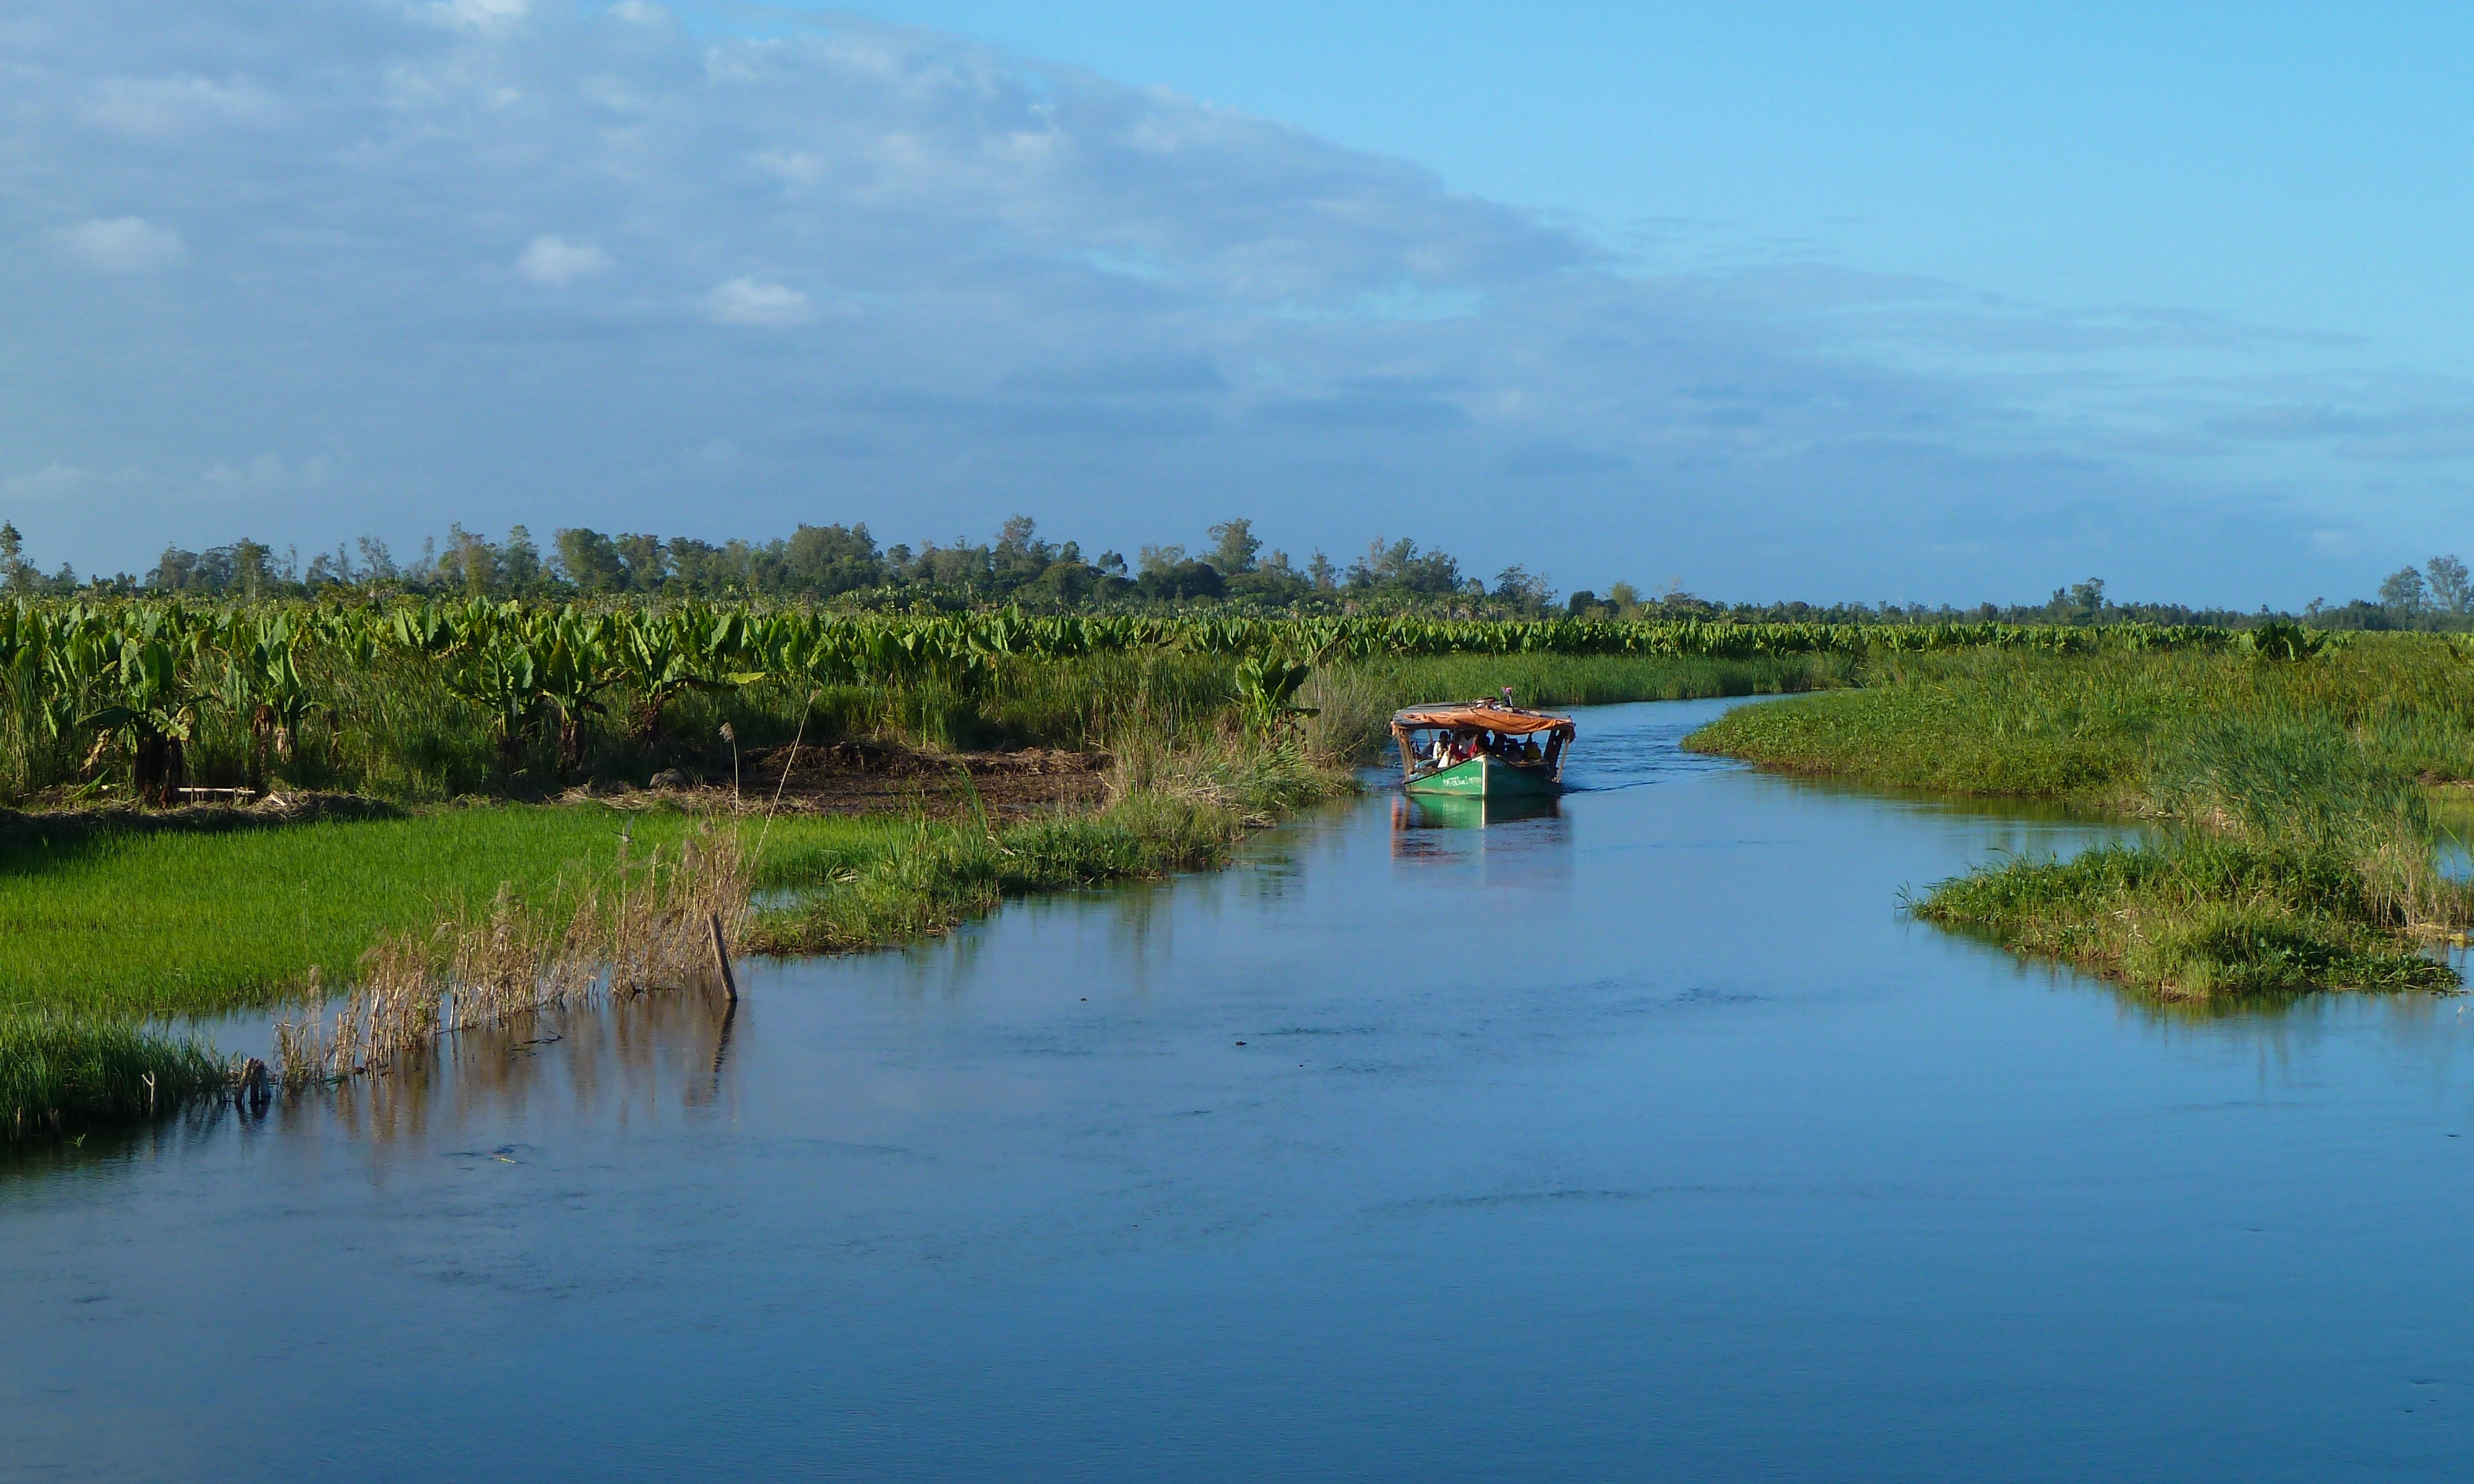 Madagascar with a thousand facets, discovering the Panganales canal